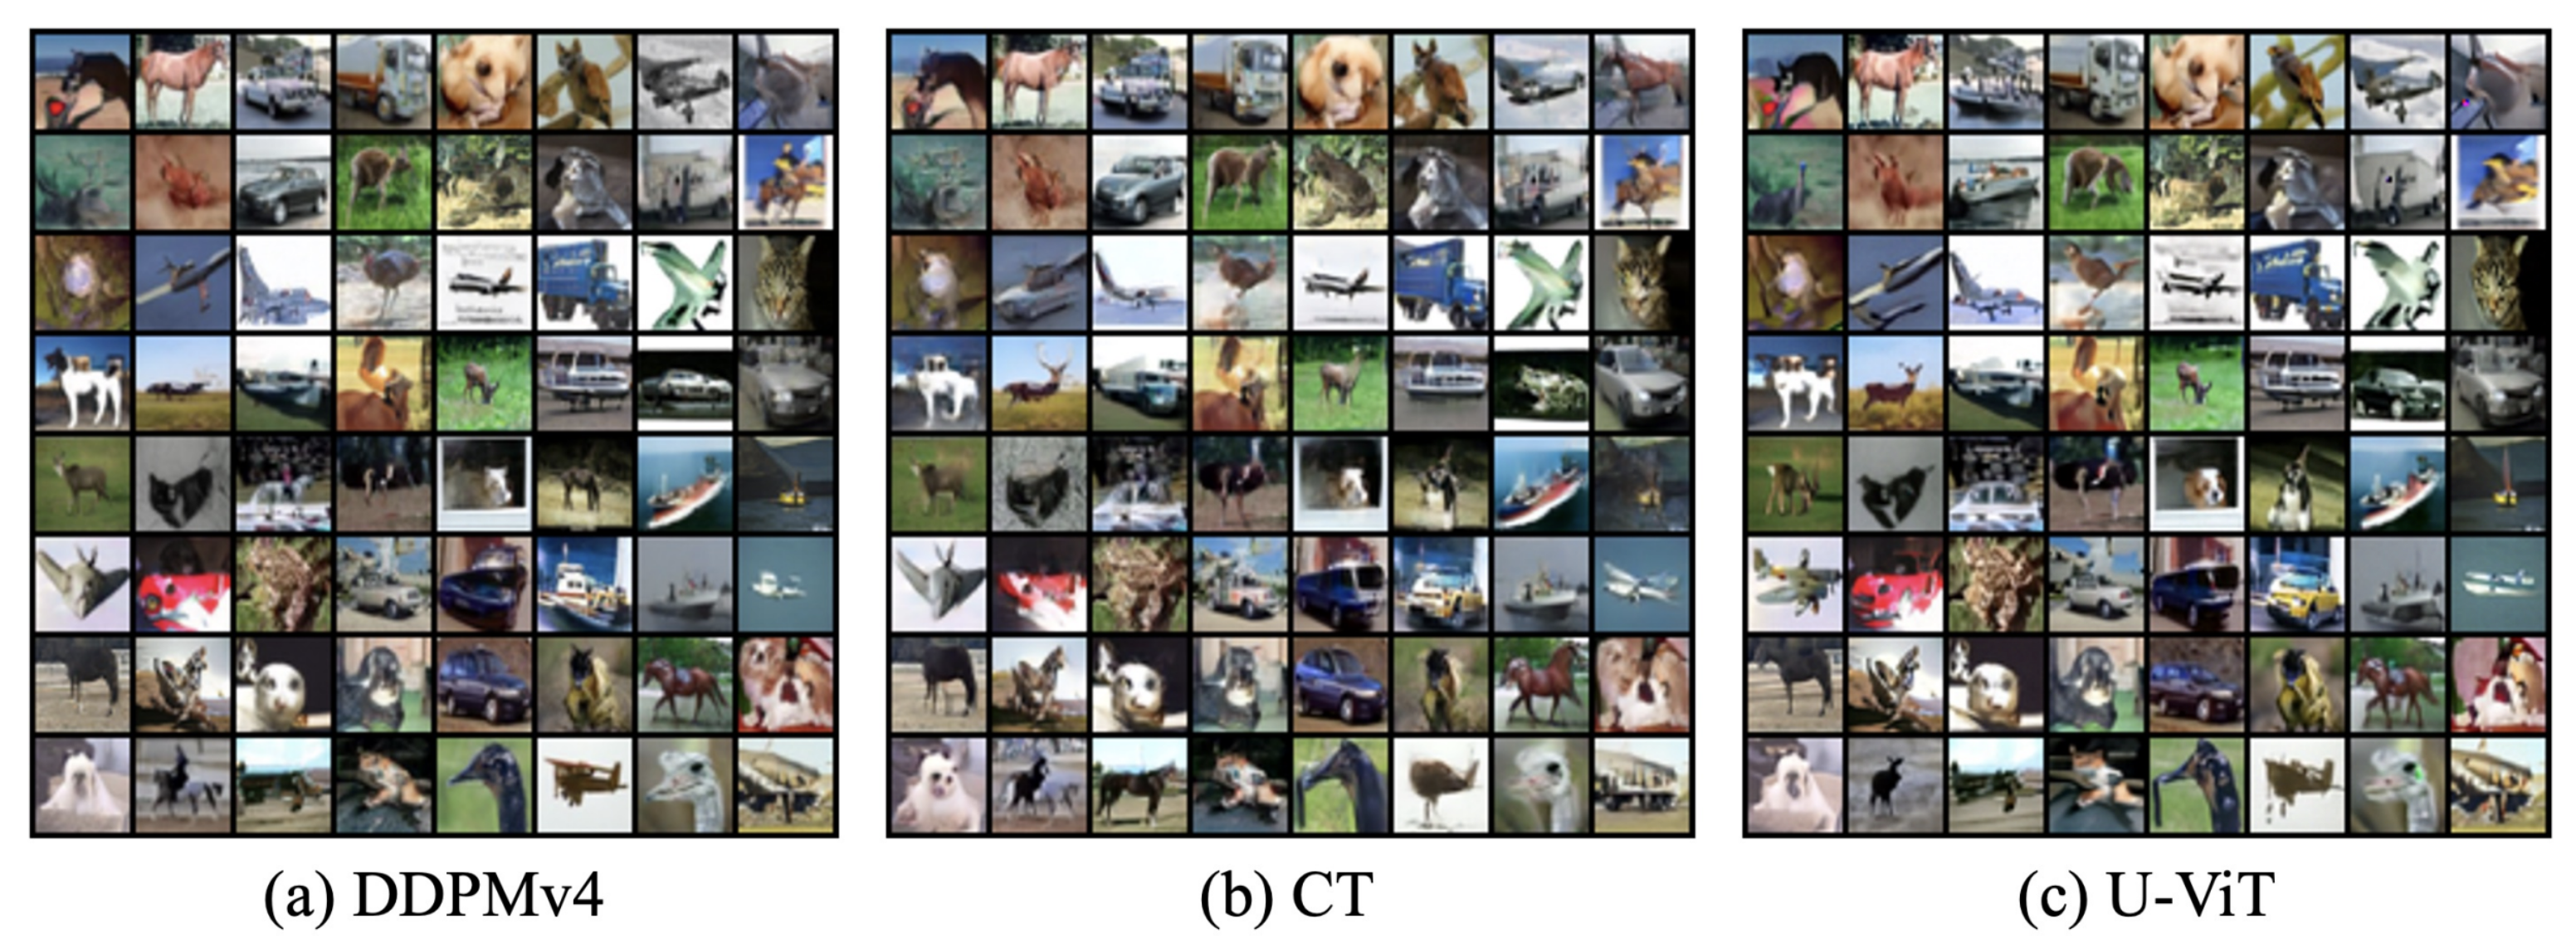 Three 8-by-8 grids showing small images in each cell, generated from three different diffusion models. The images are similar across models.